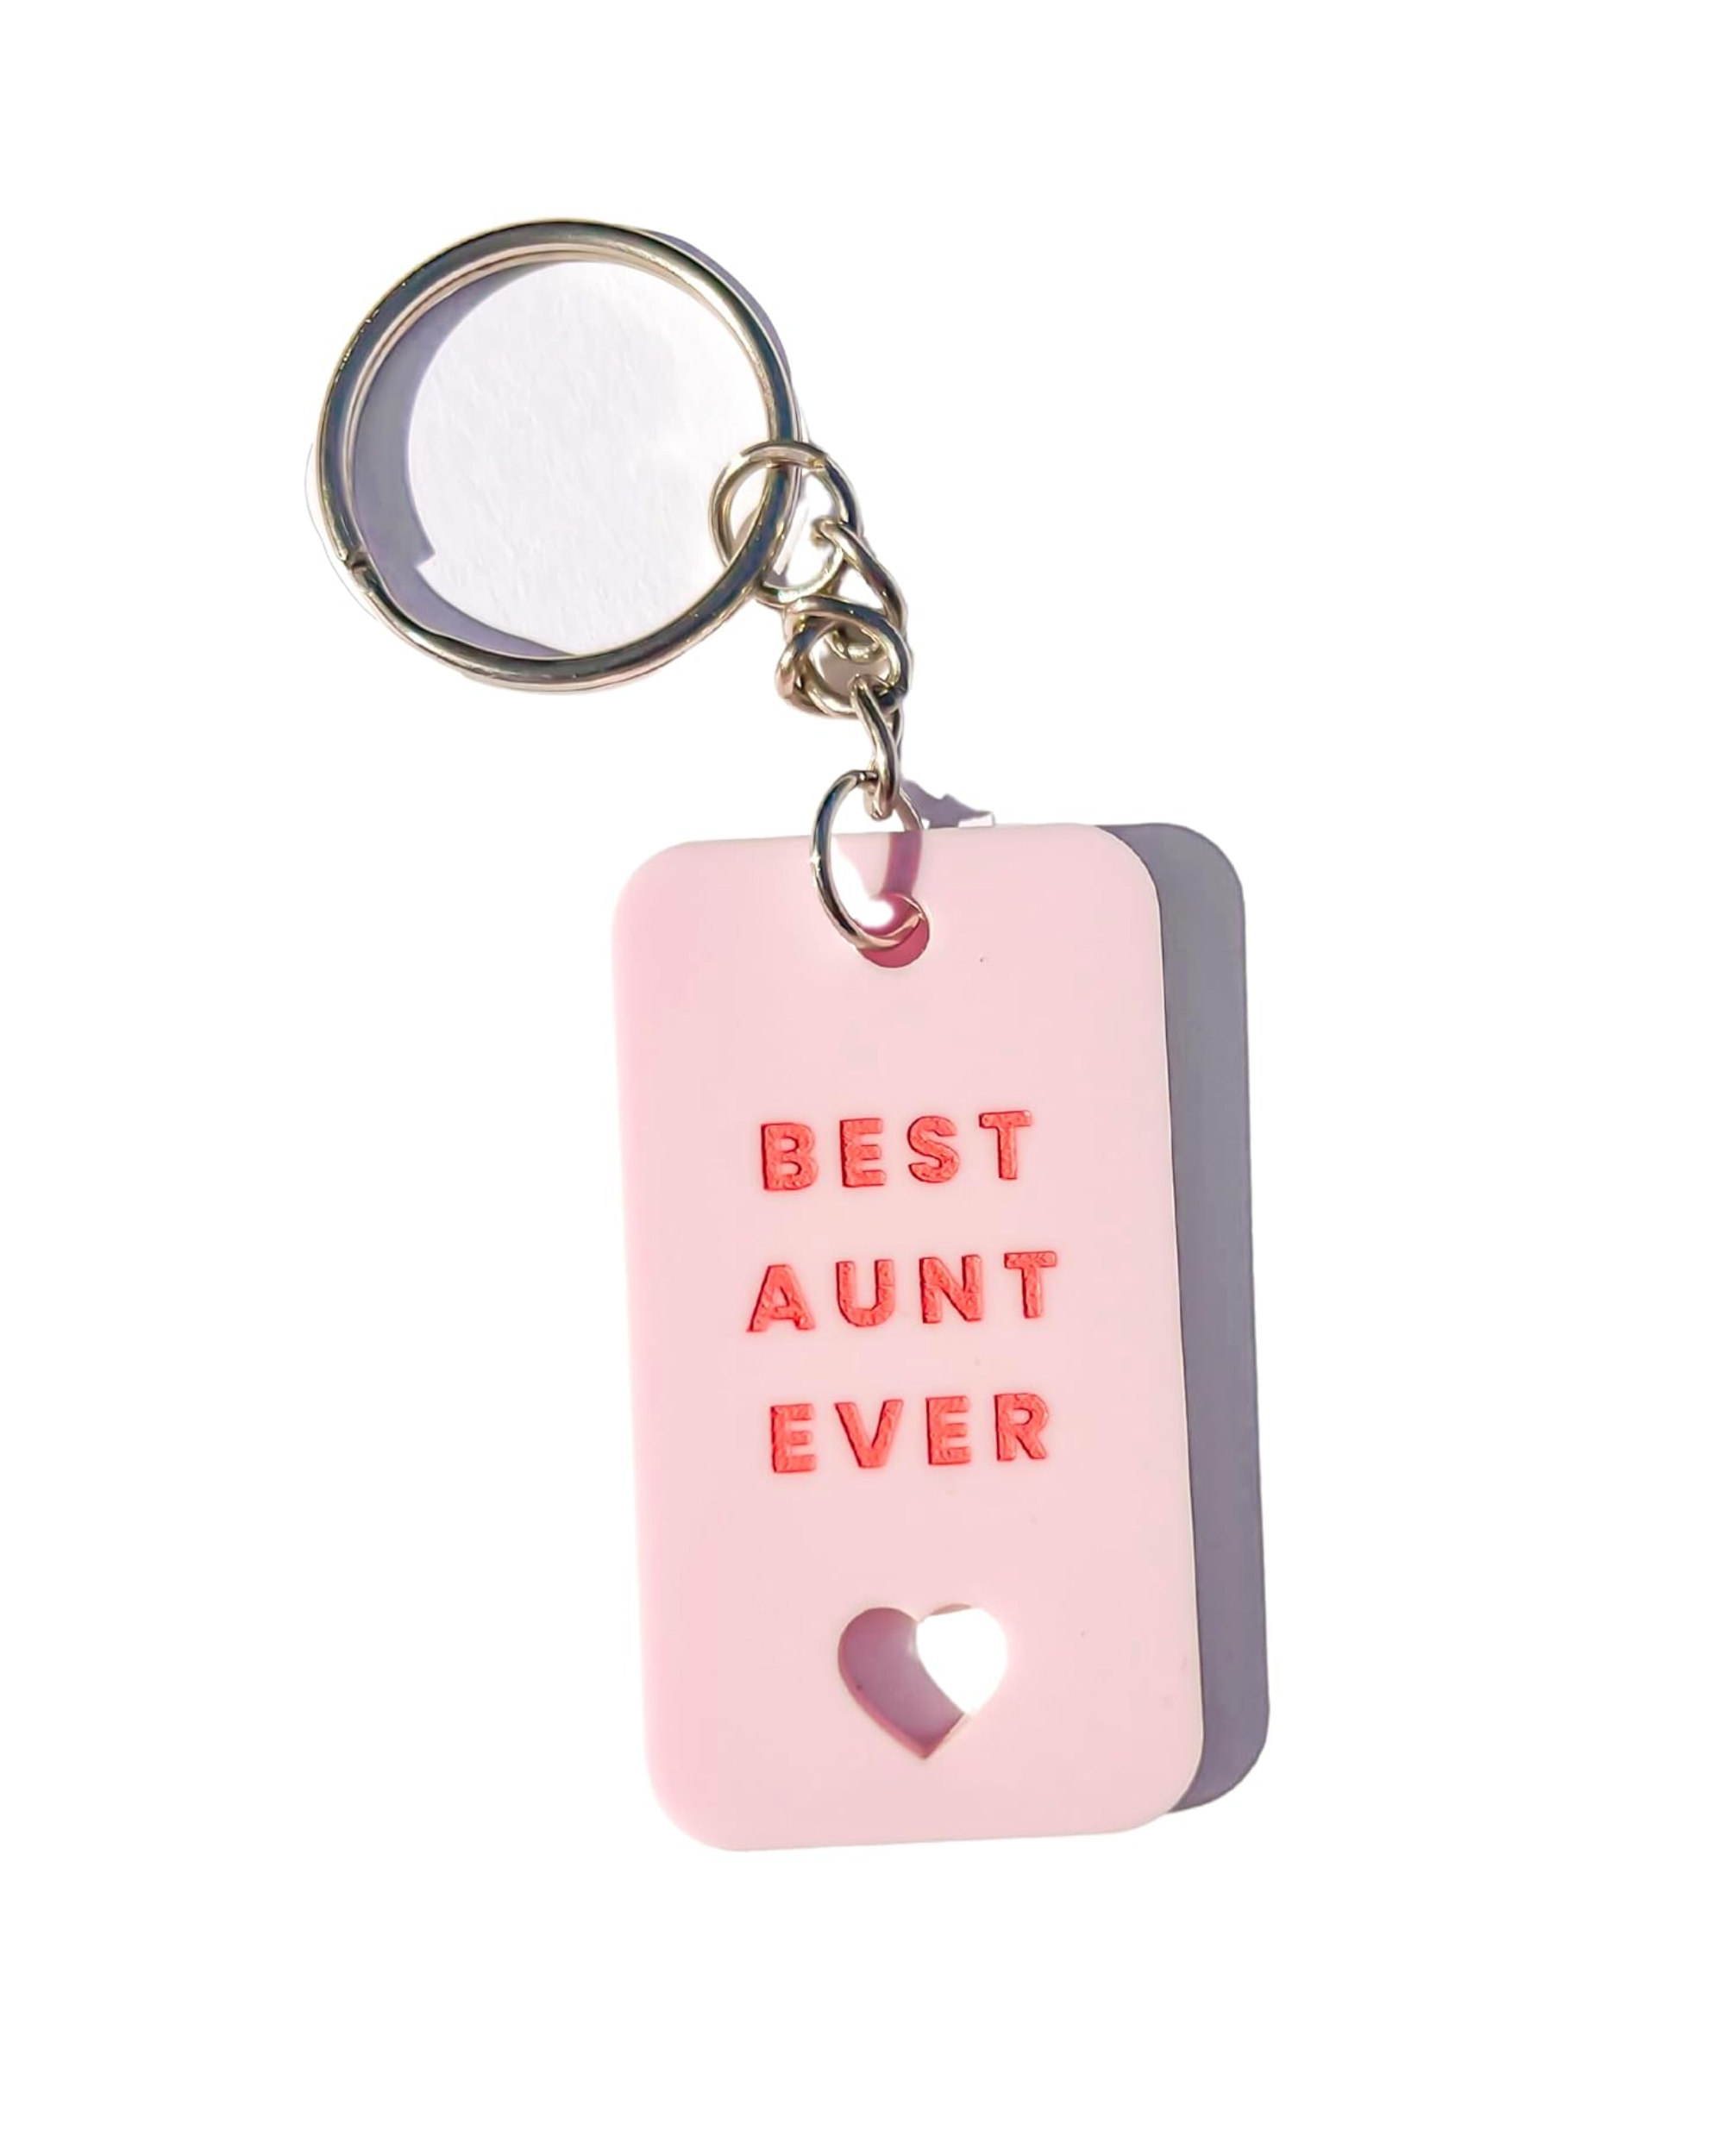 Best Aunt Ever Keychain